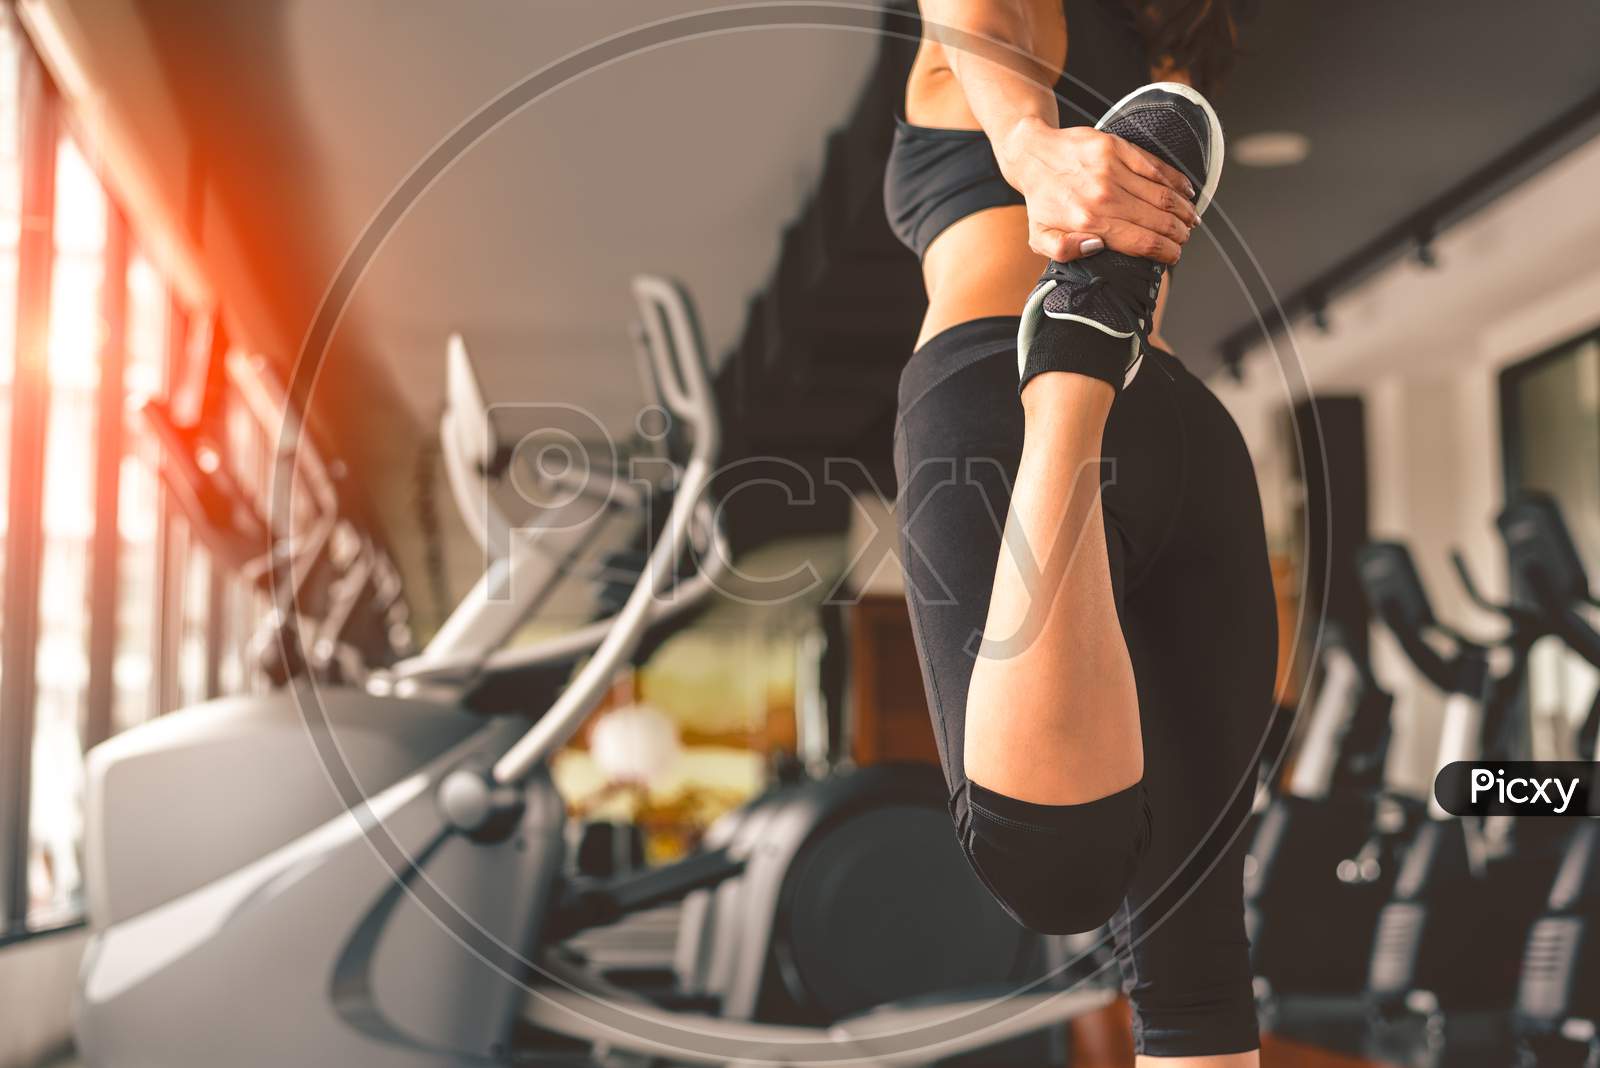 Back View Of Woman Doing Yoga In Fitness Sport Training Club With Sport Equipment And Accessories. Workout And Bodybuilder Concept. Lifestyles Leisure And Indoors Activity. Treadmill Background